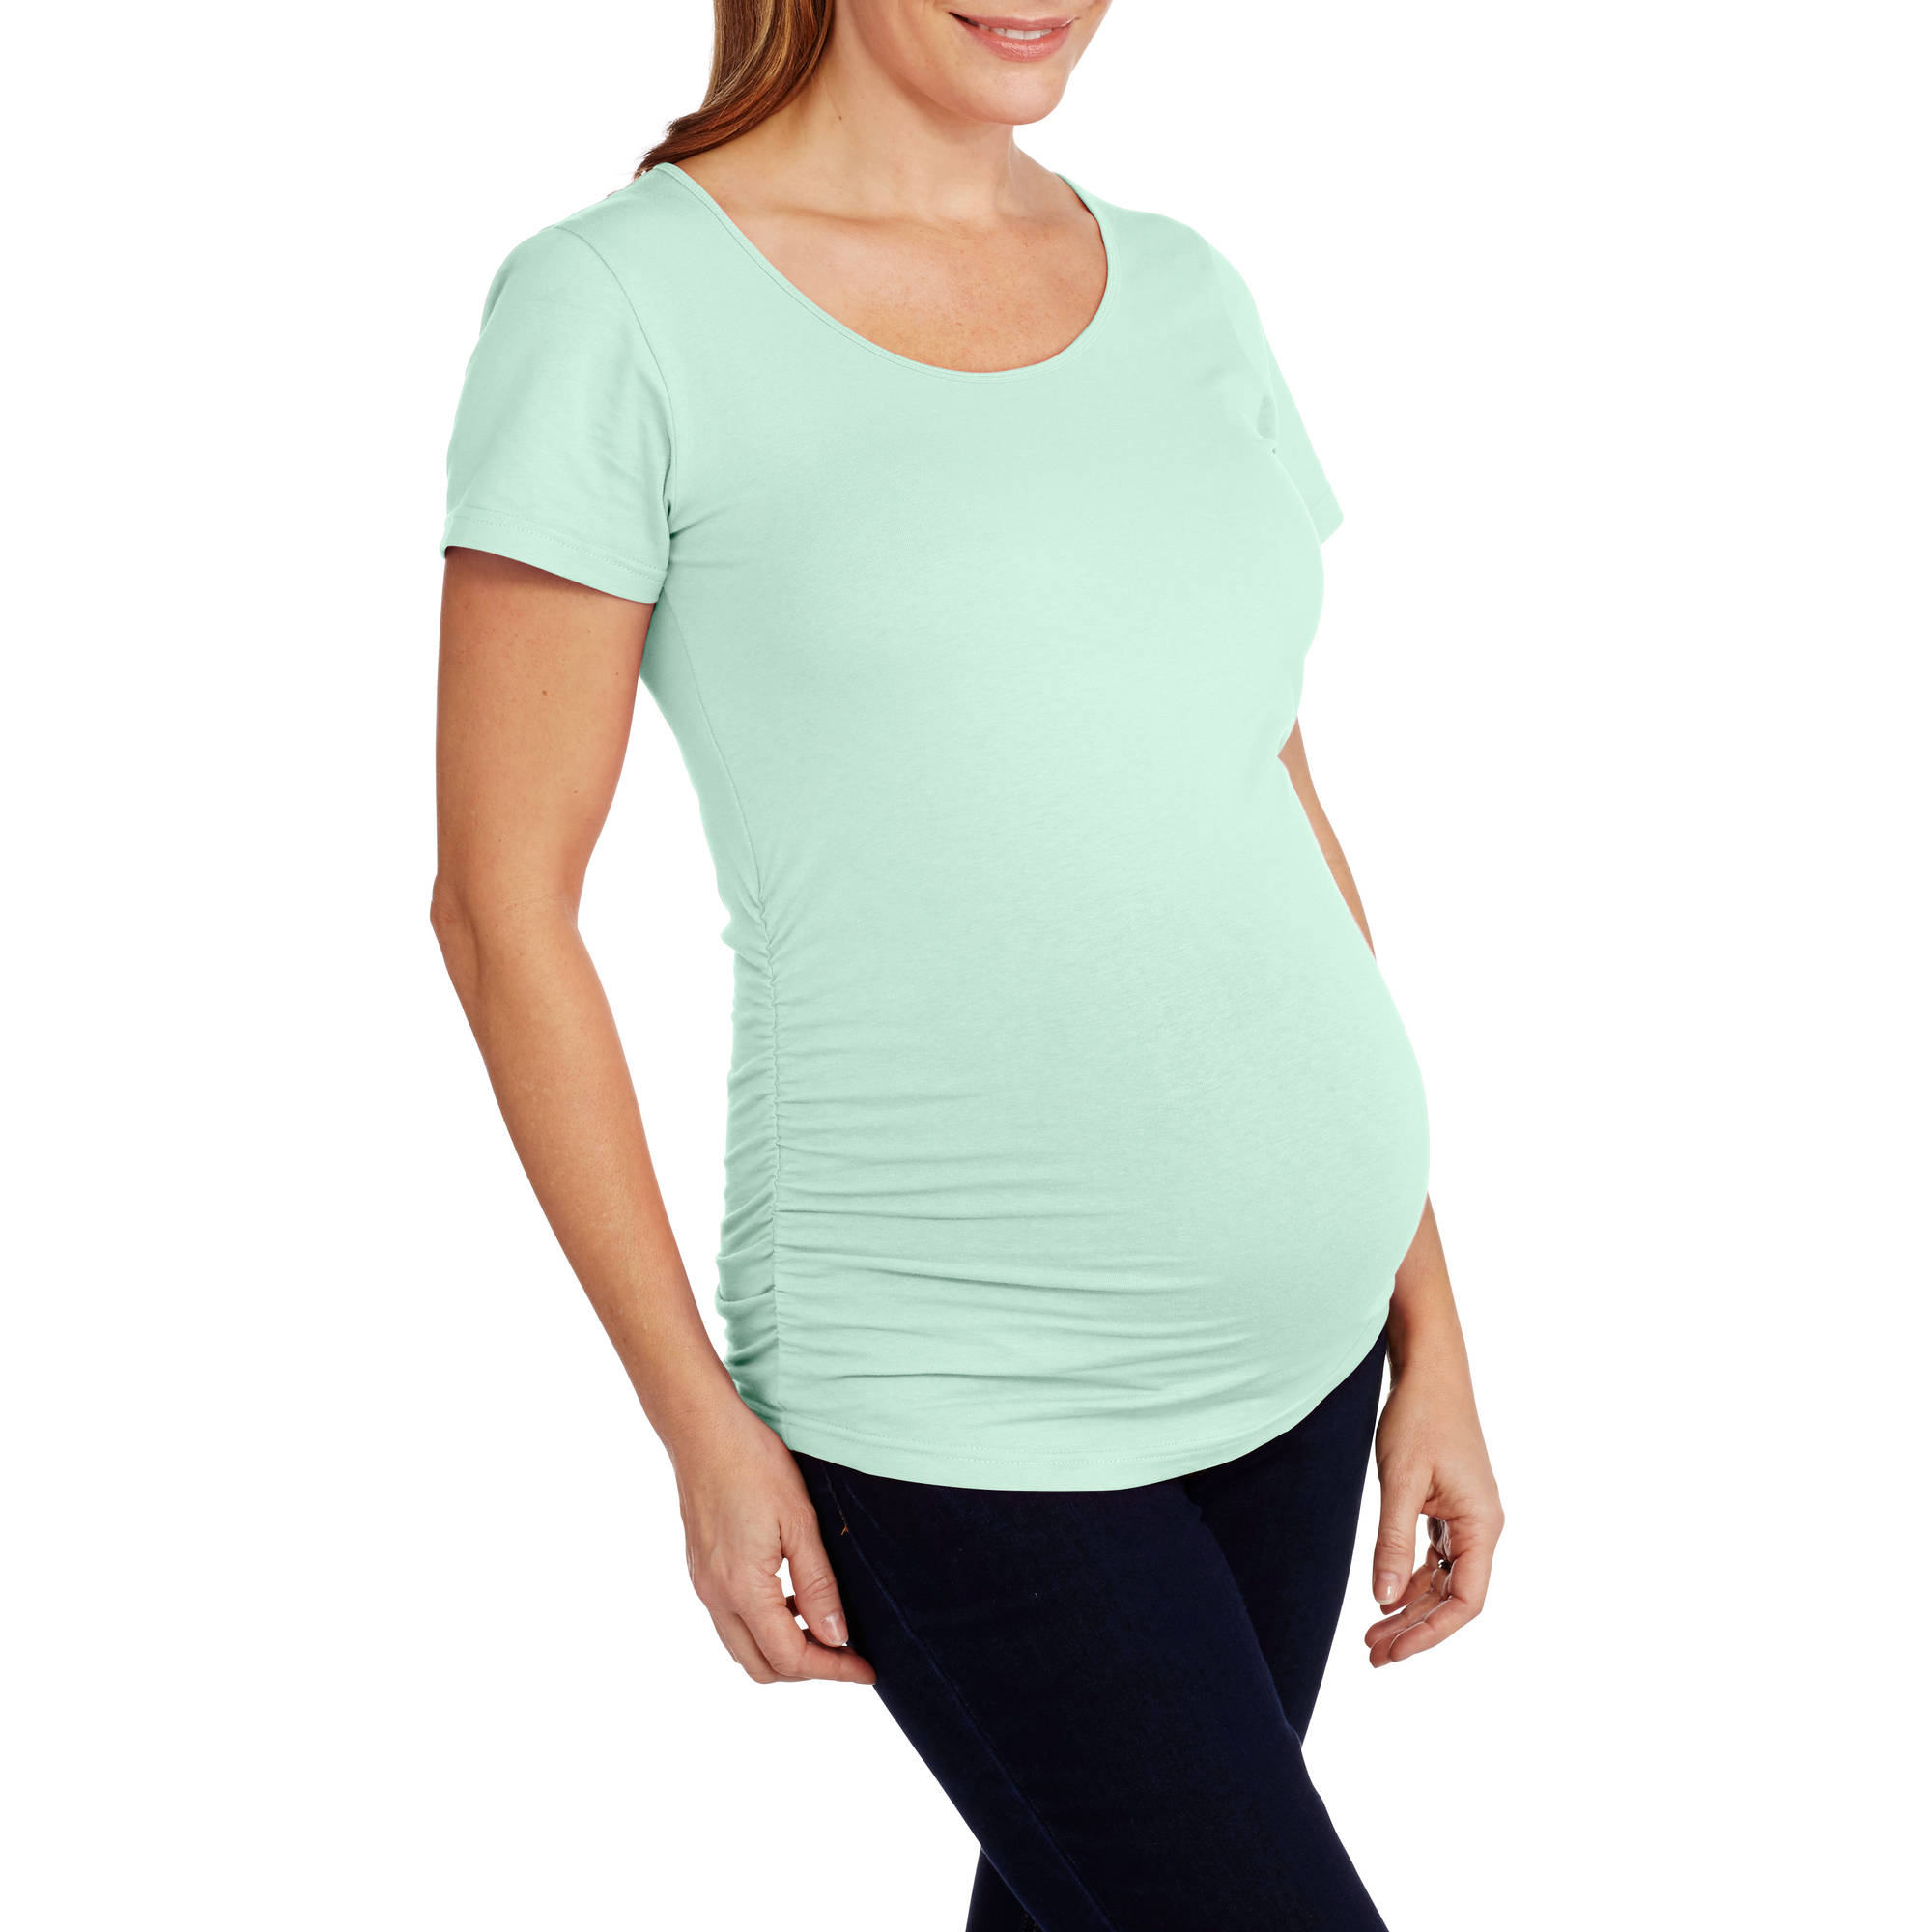 Oh! Mamma Maternity Short Sleeve Tee With Flattering Side Ruching - Available in Plus Sizes - image 1 of 2